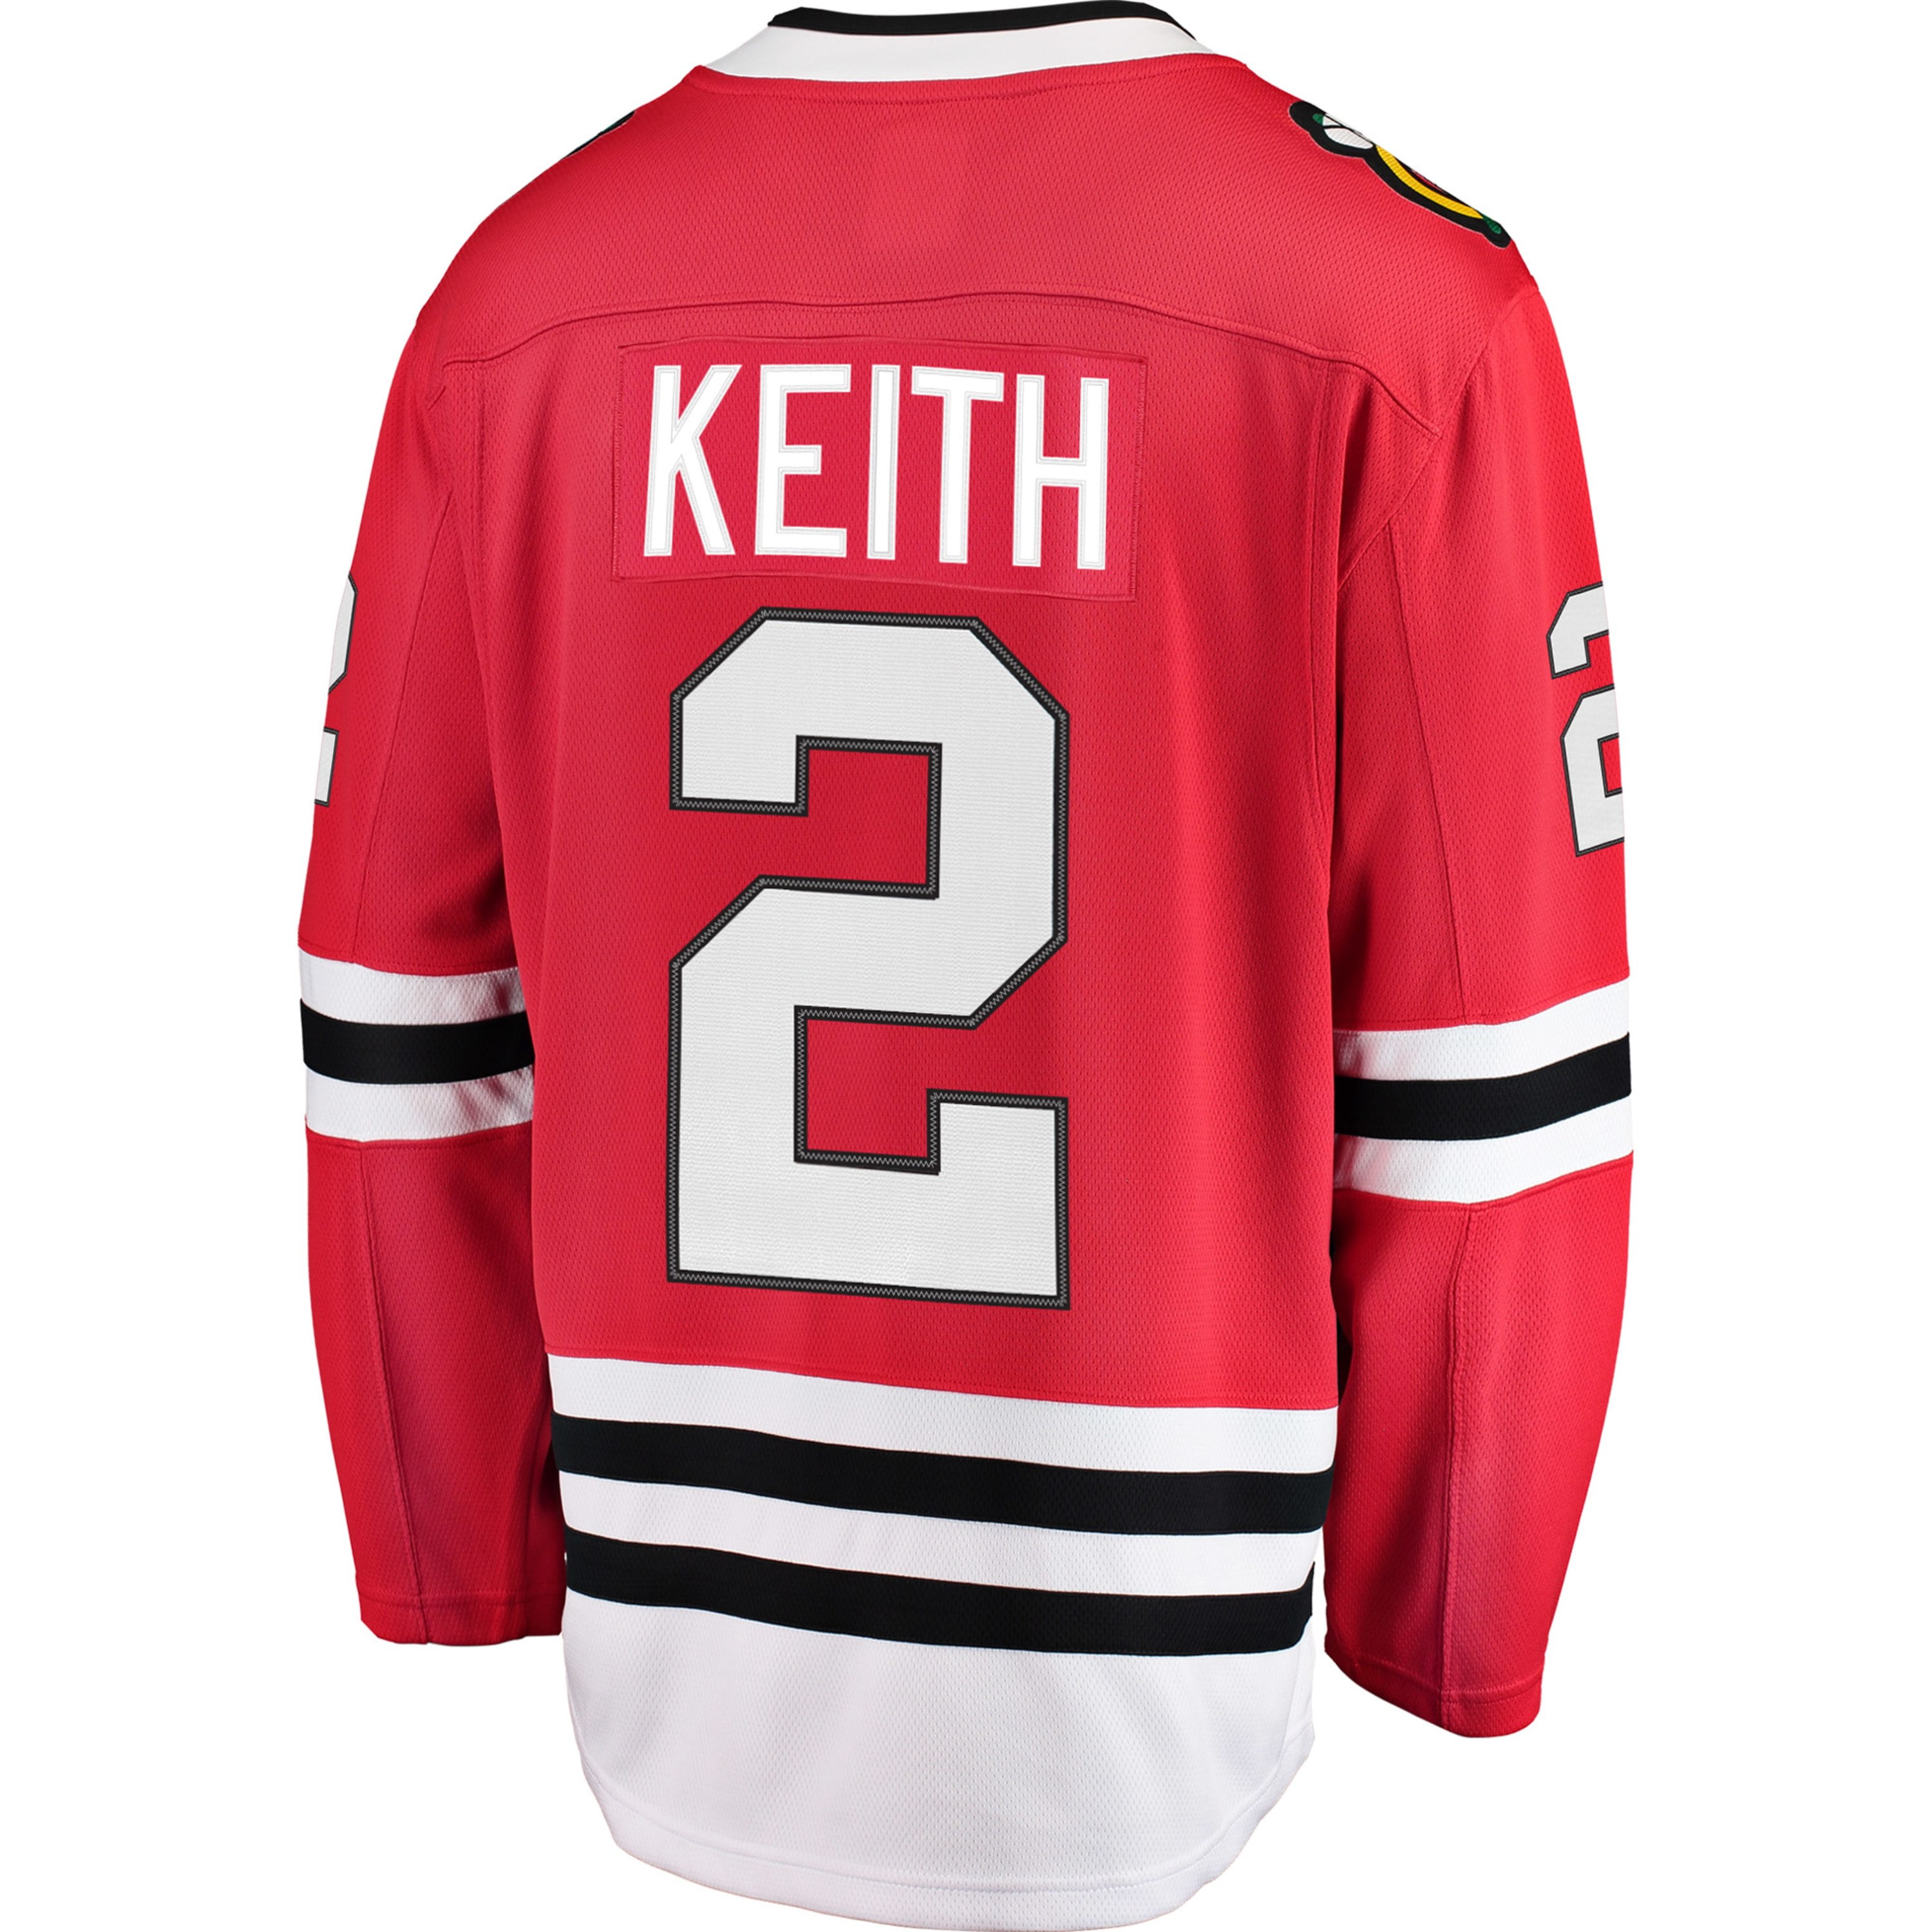 duncan keith home jersey